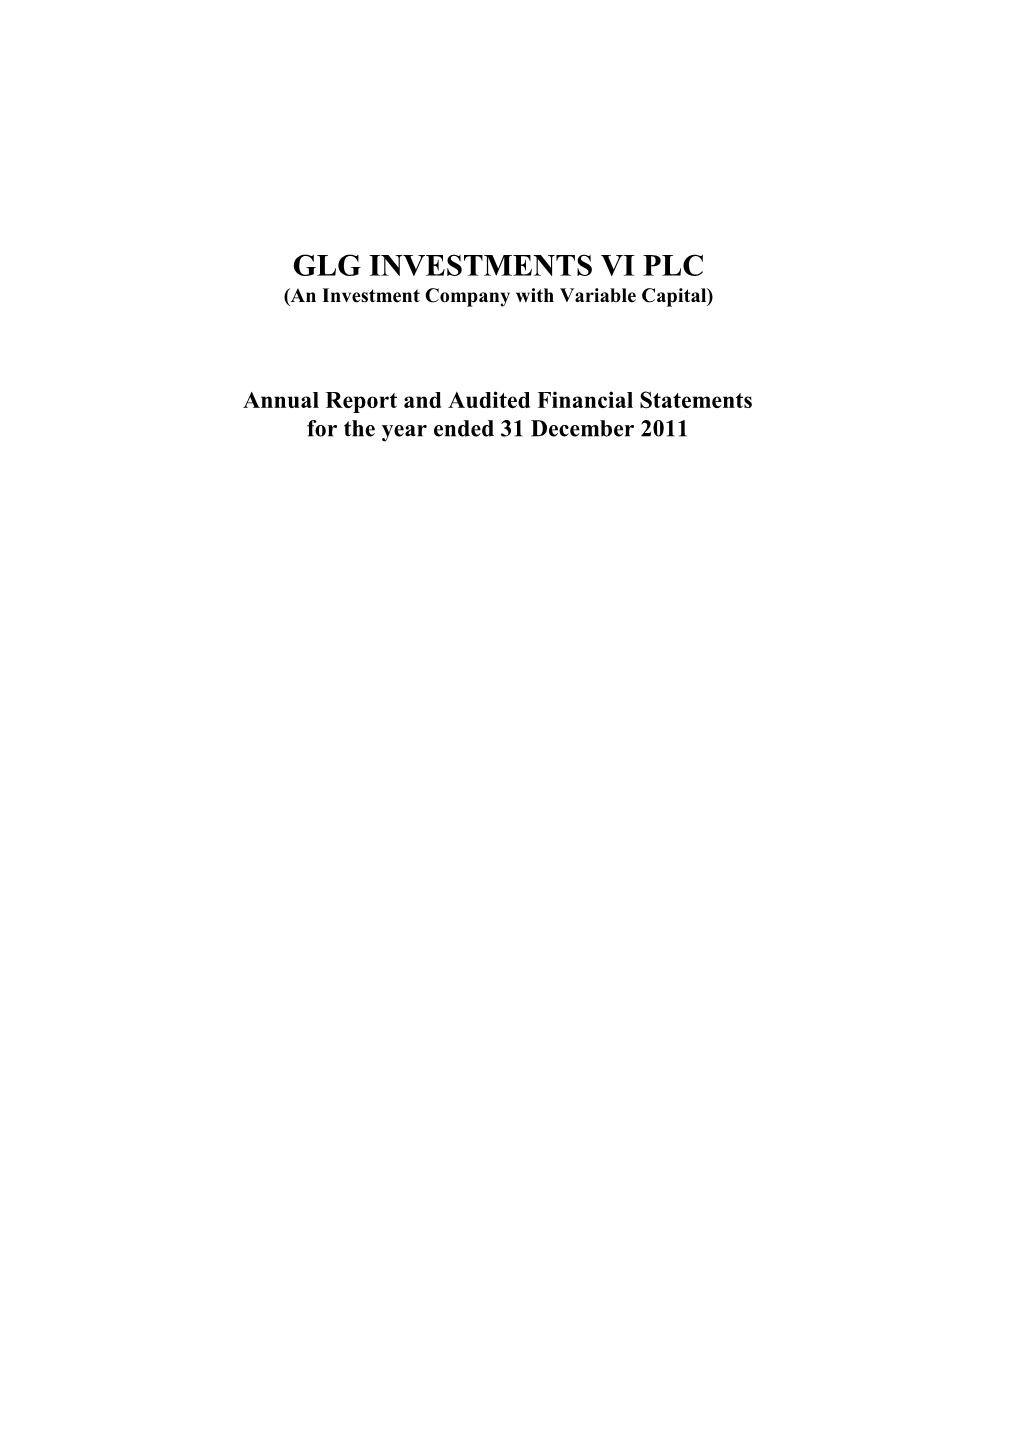 GLG INVESTMENTS VI PLC (An Investment Company with Variable Capital)